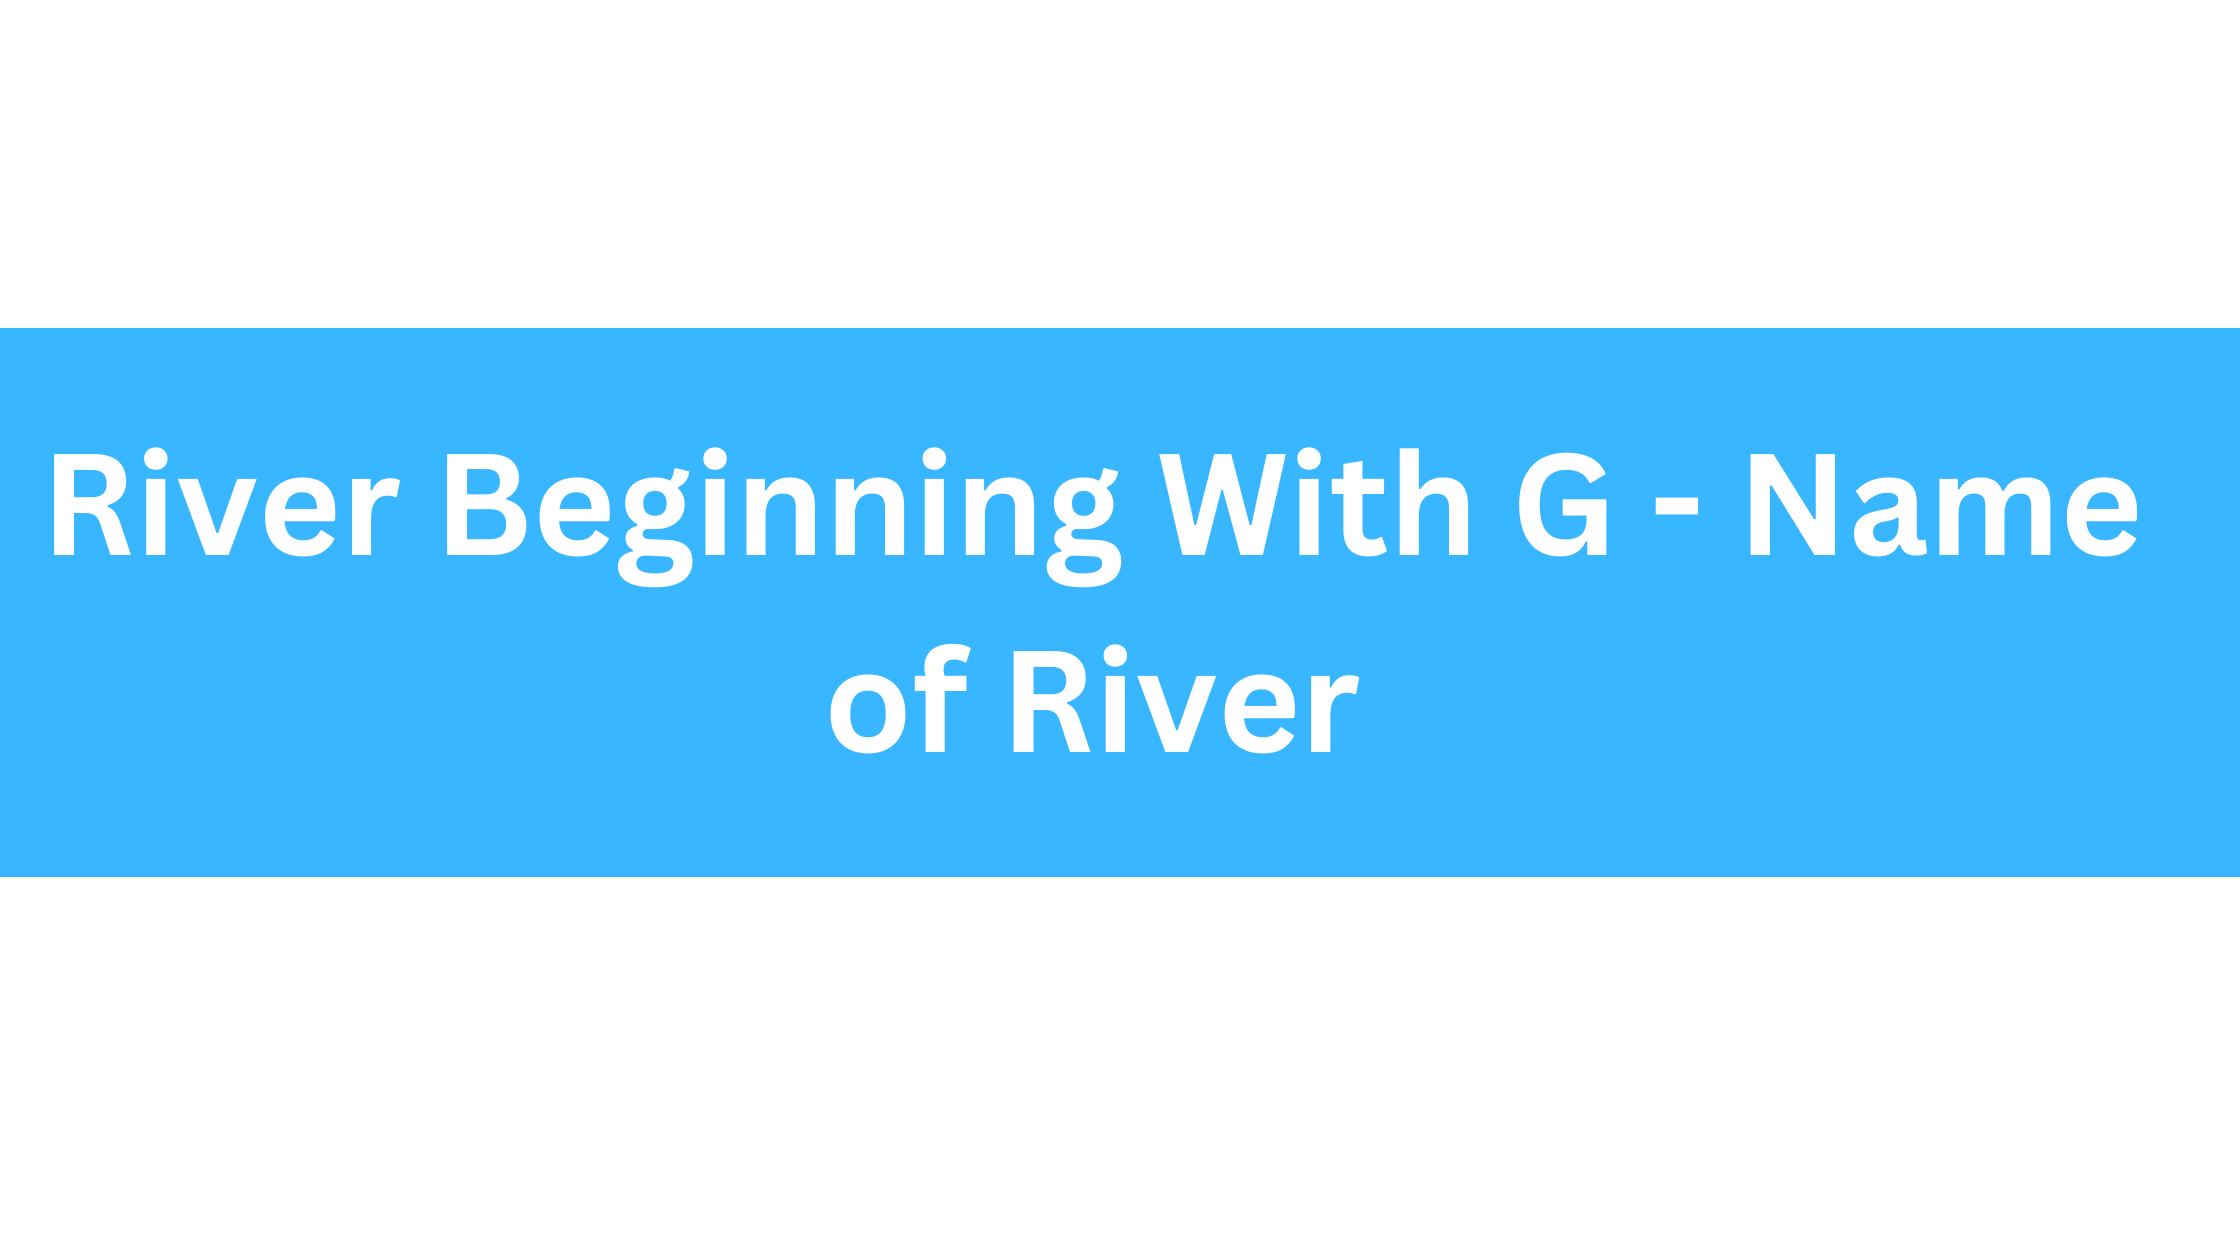 River Beginning With G